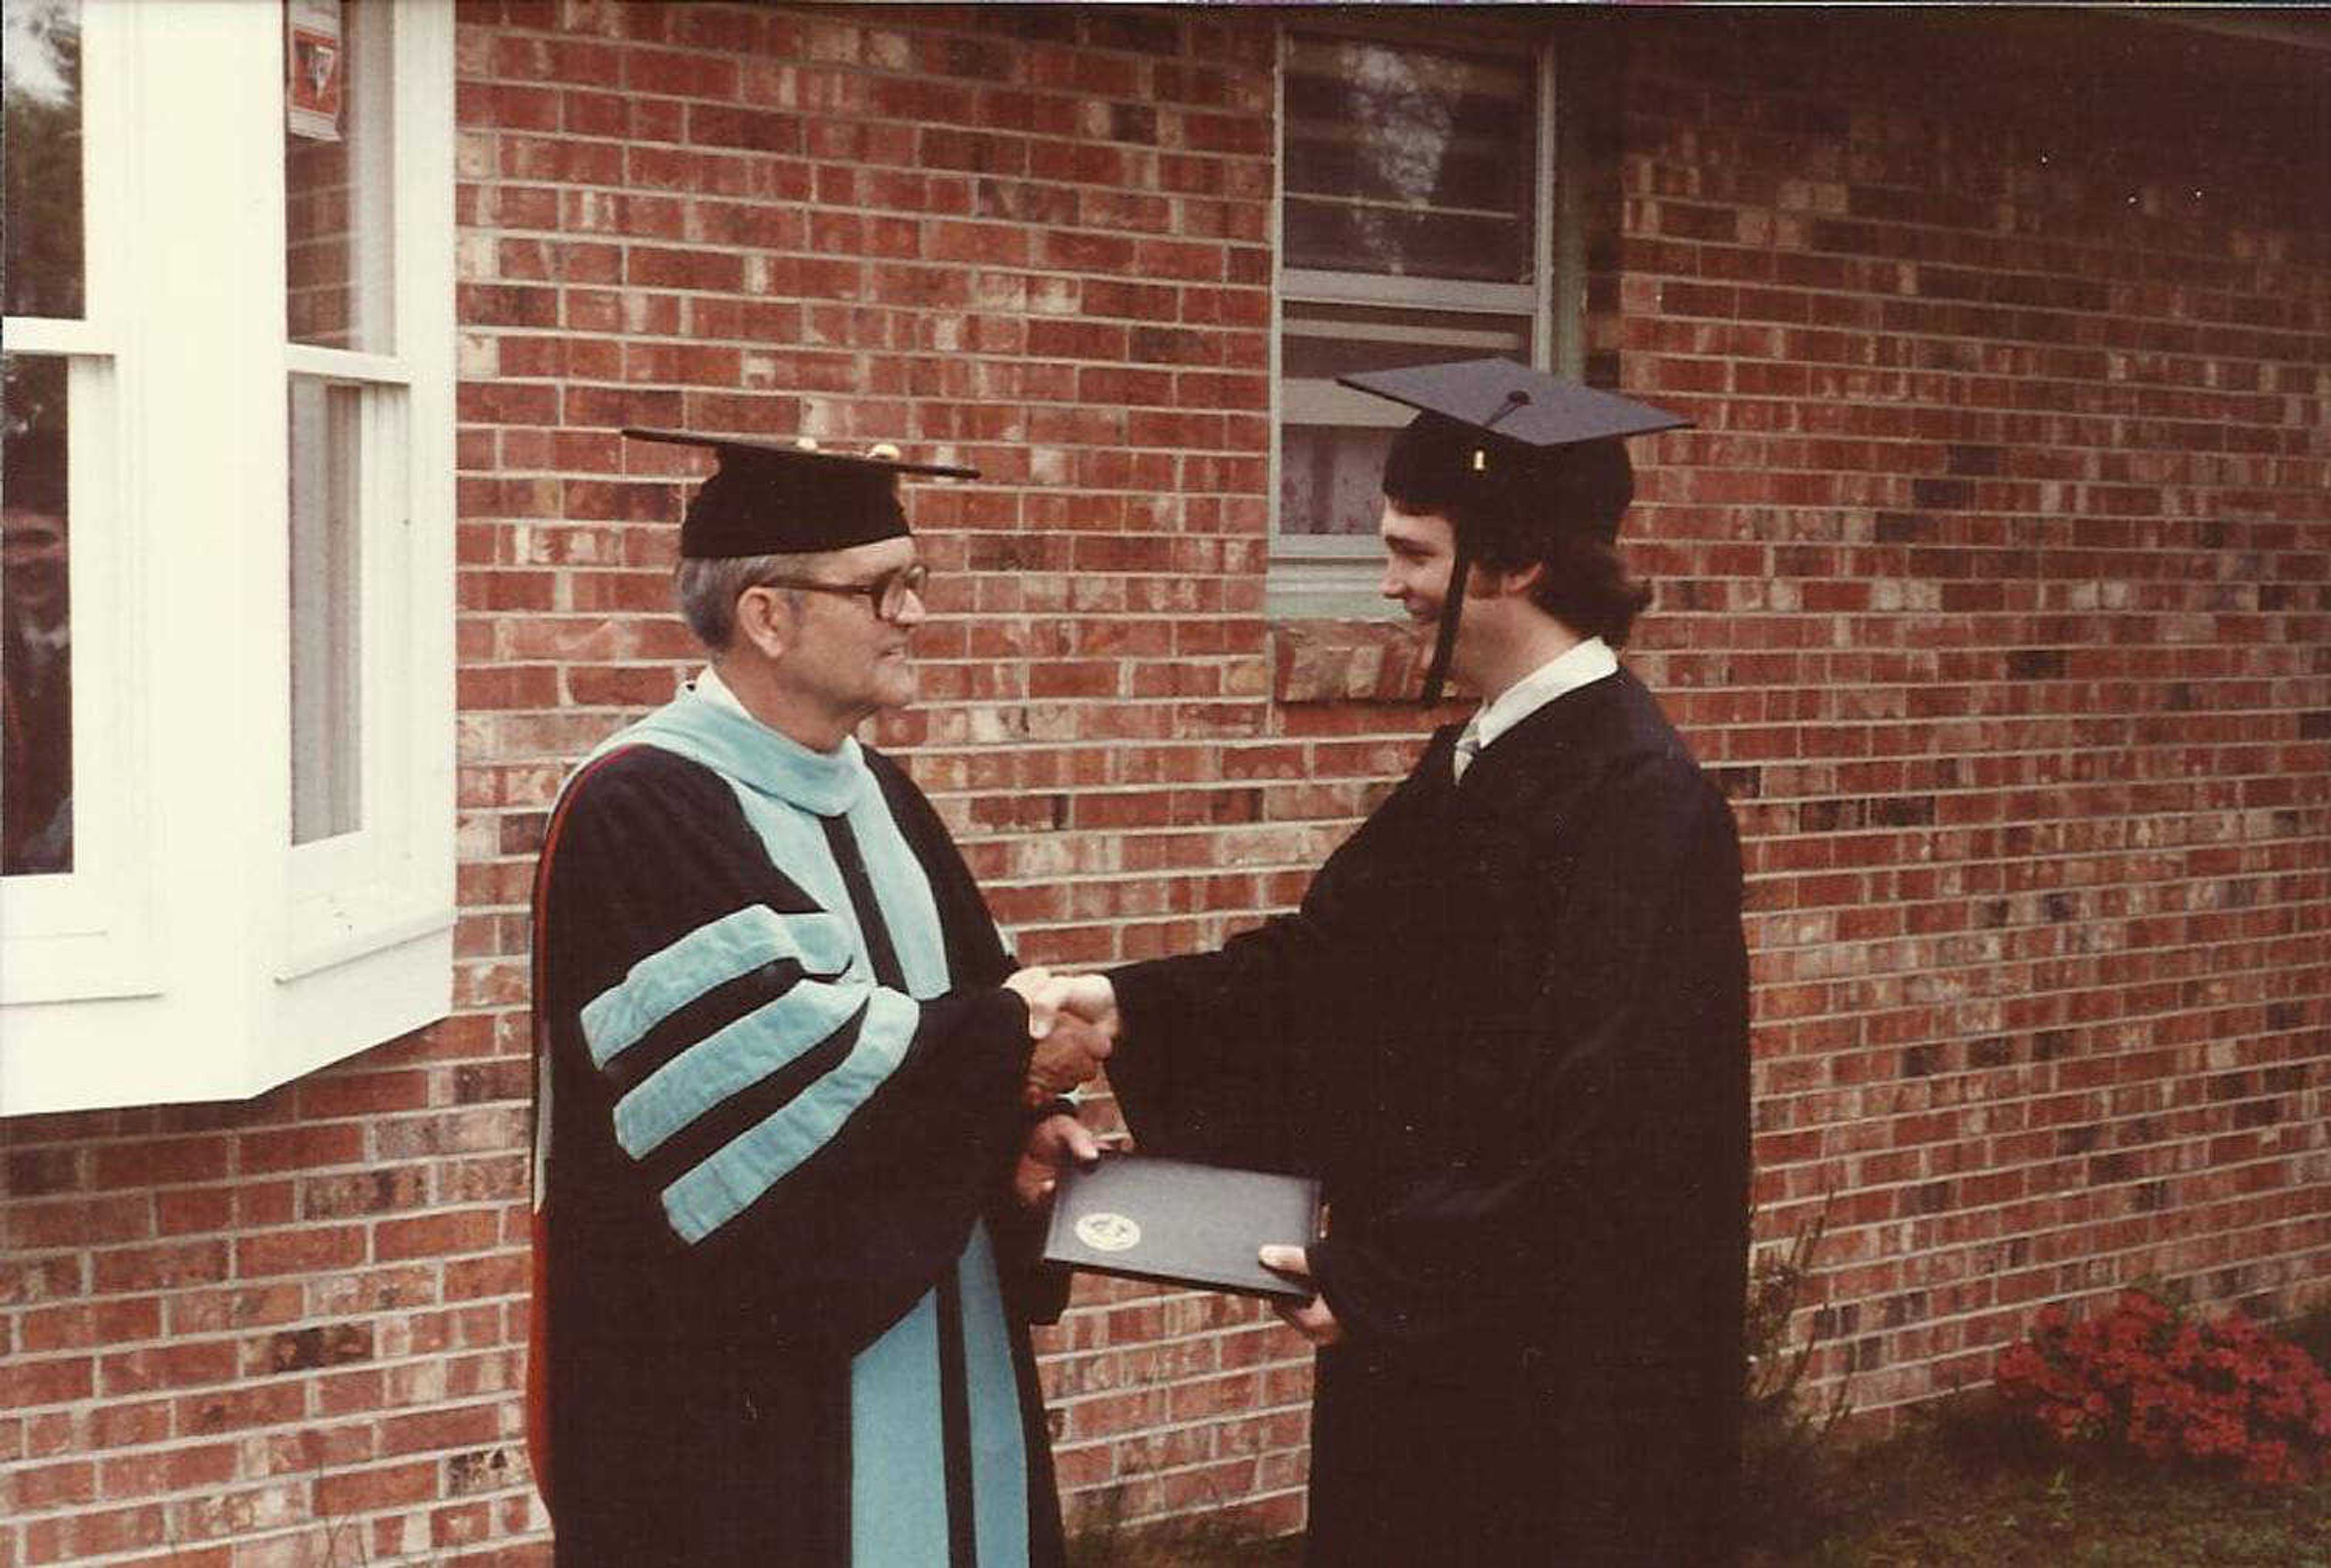  Robert Cox Sr. handed all three of his sons their diplomas at their graduations. Submitted photo